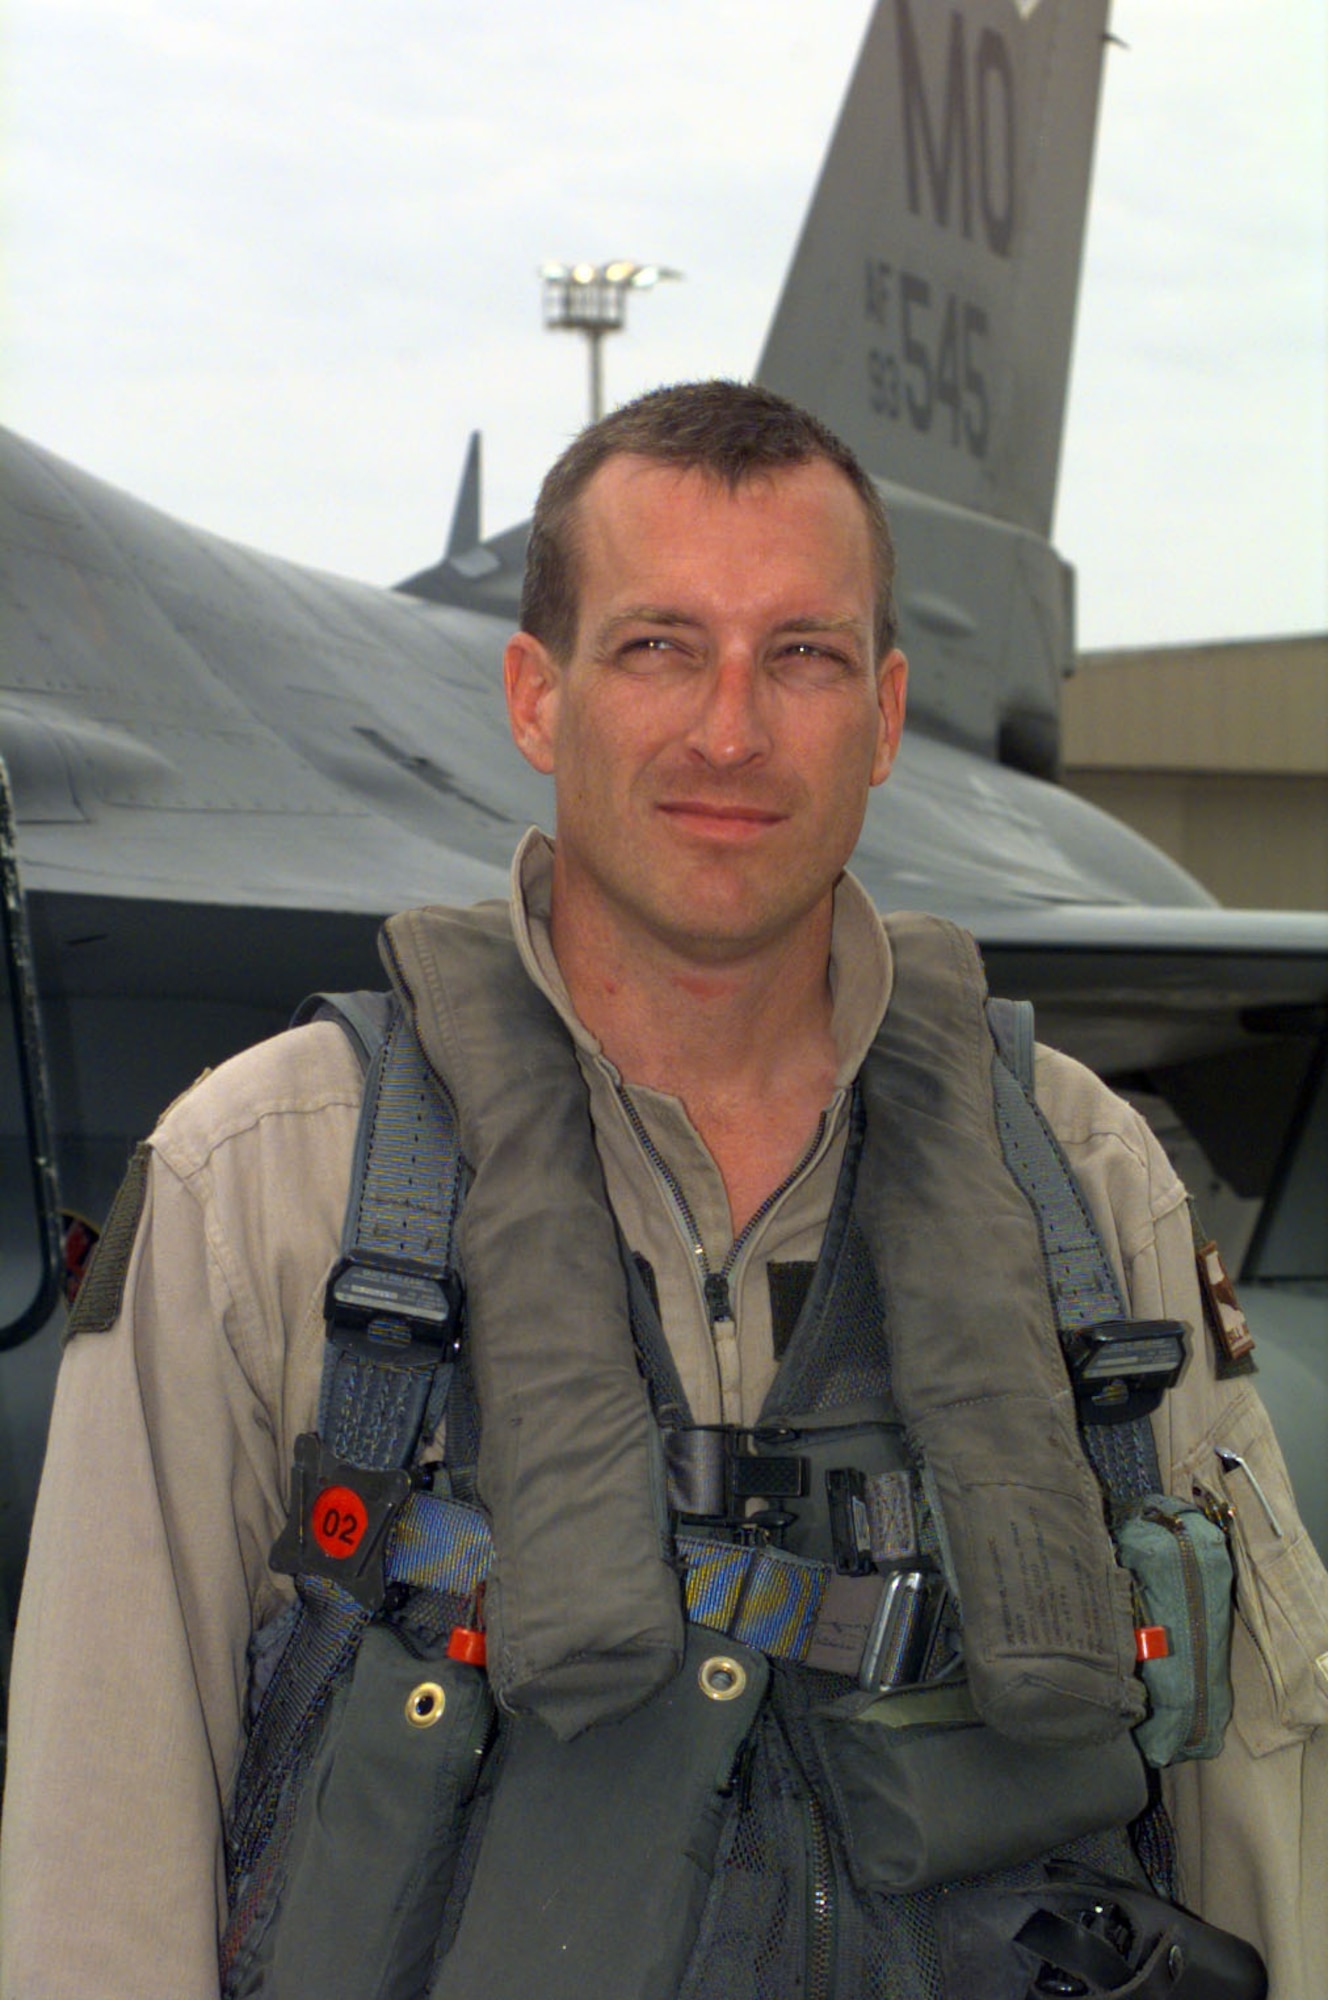 Lt. Col. William Andrews pictured during his deployment to Southwest Asia in support of Operation Southern Watch in 1998. (U.S. Air Force photo)